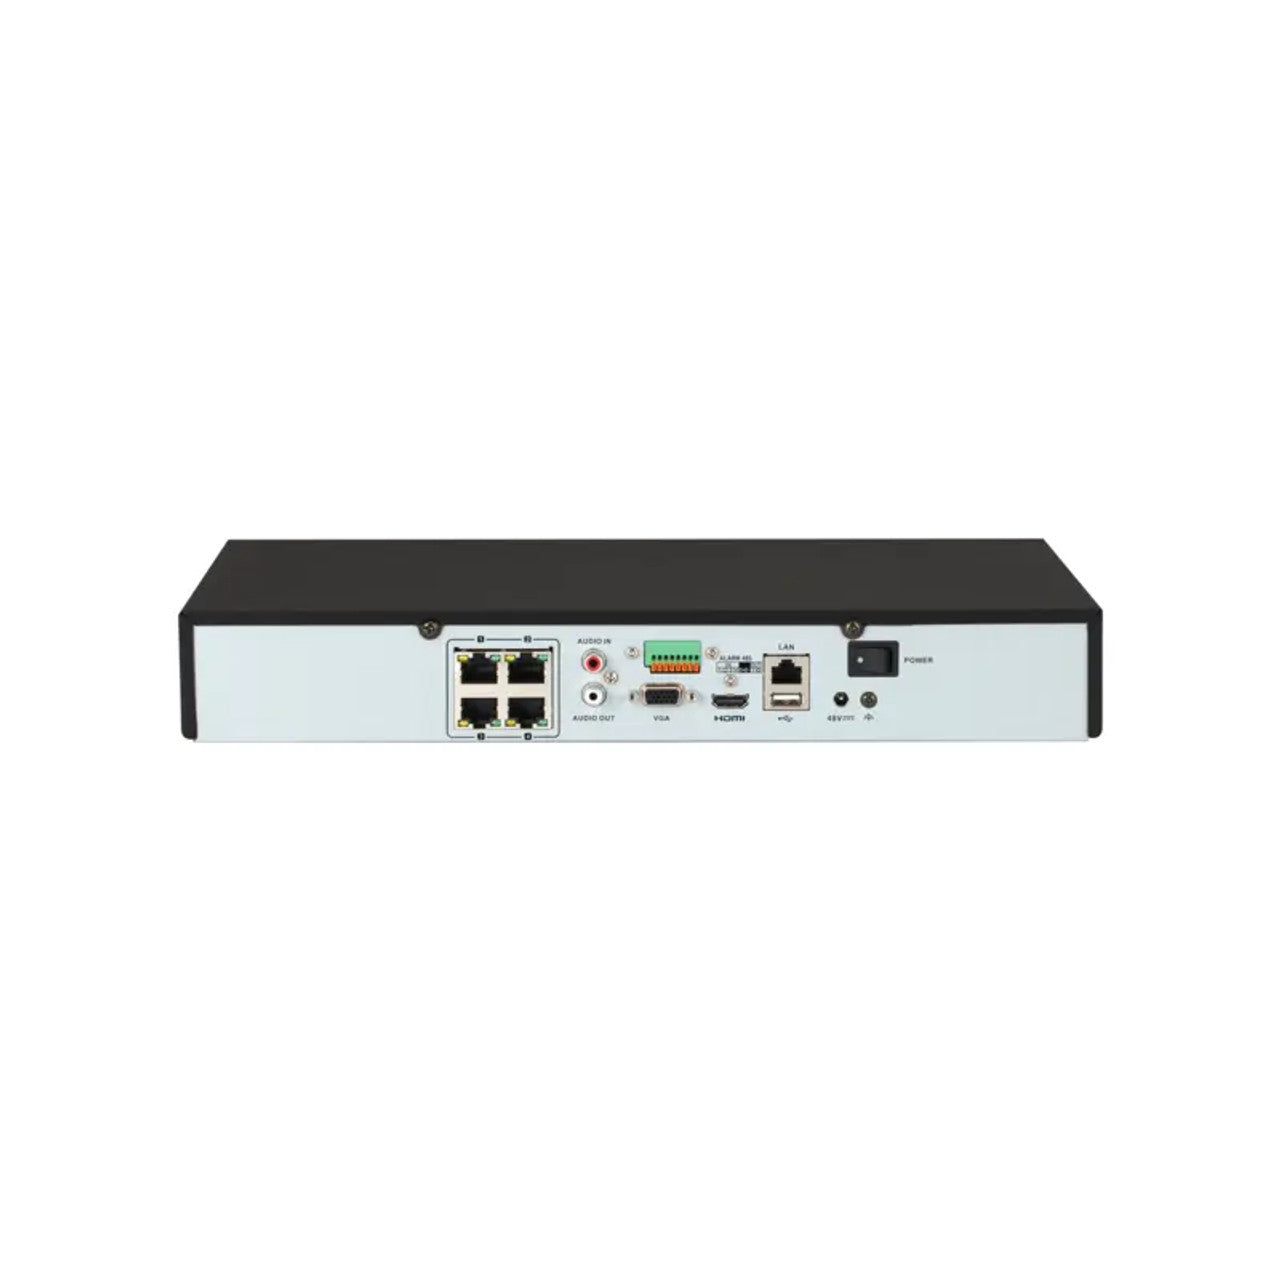 Digital Watchdog DW-VP912T4P 4-channel VMAX IP Plus PoE NVR with 5 virtual channels, 12TB HDD